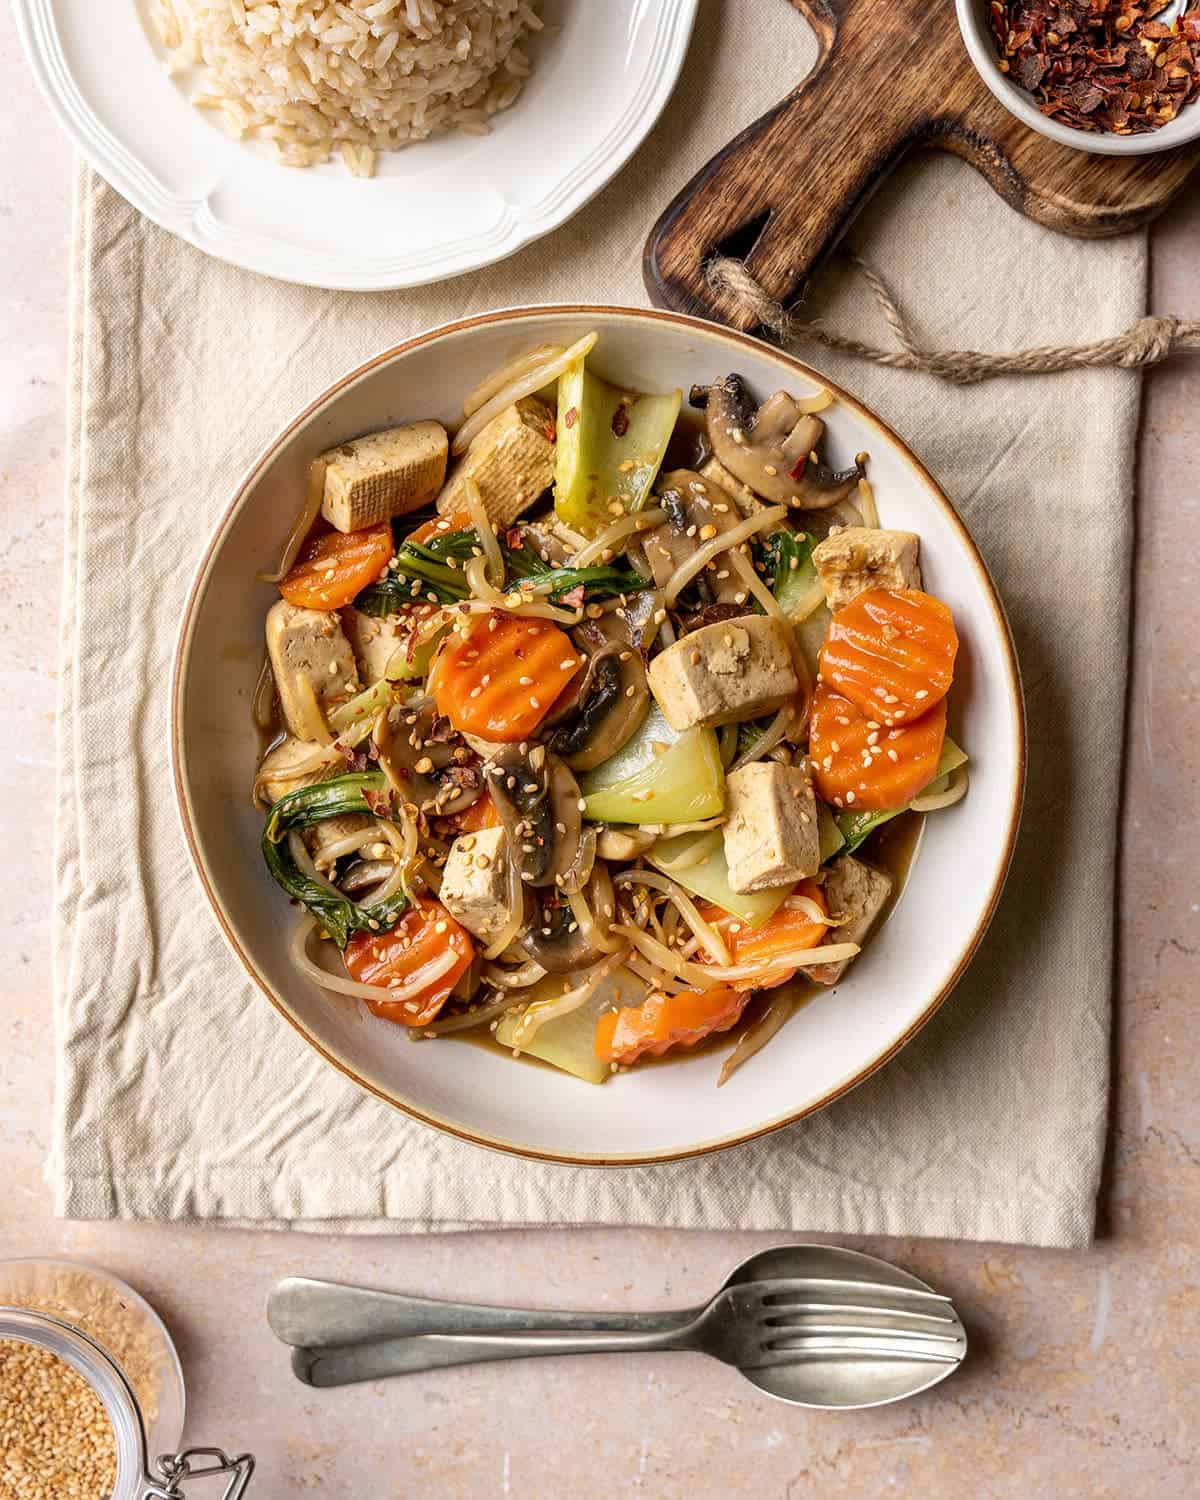 Vegan chop suey in a bowl with rice on the side and cutlery.